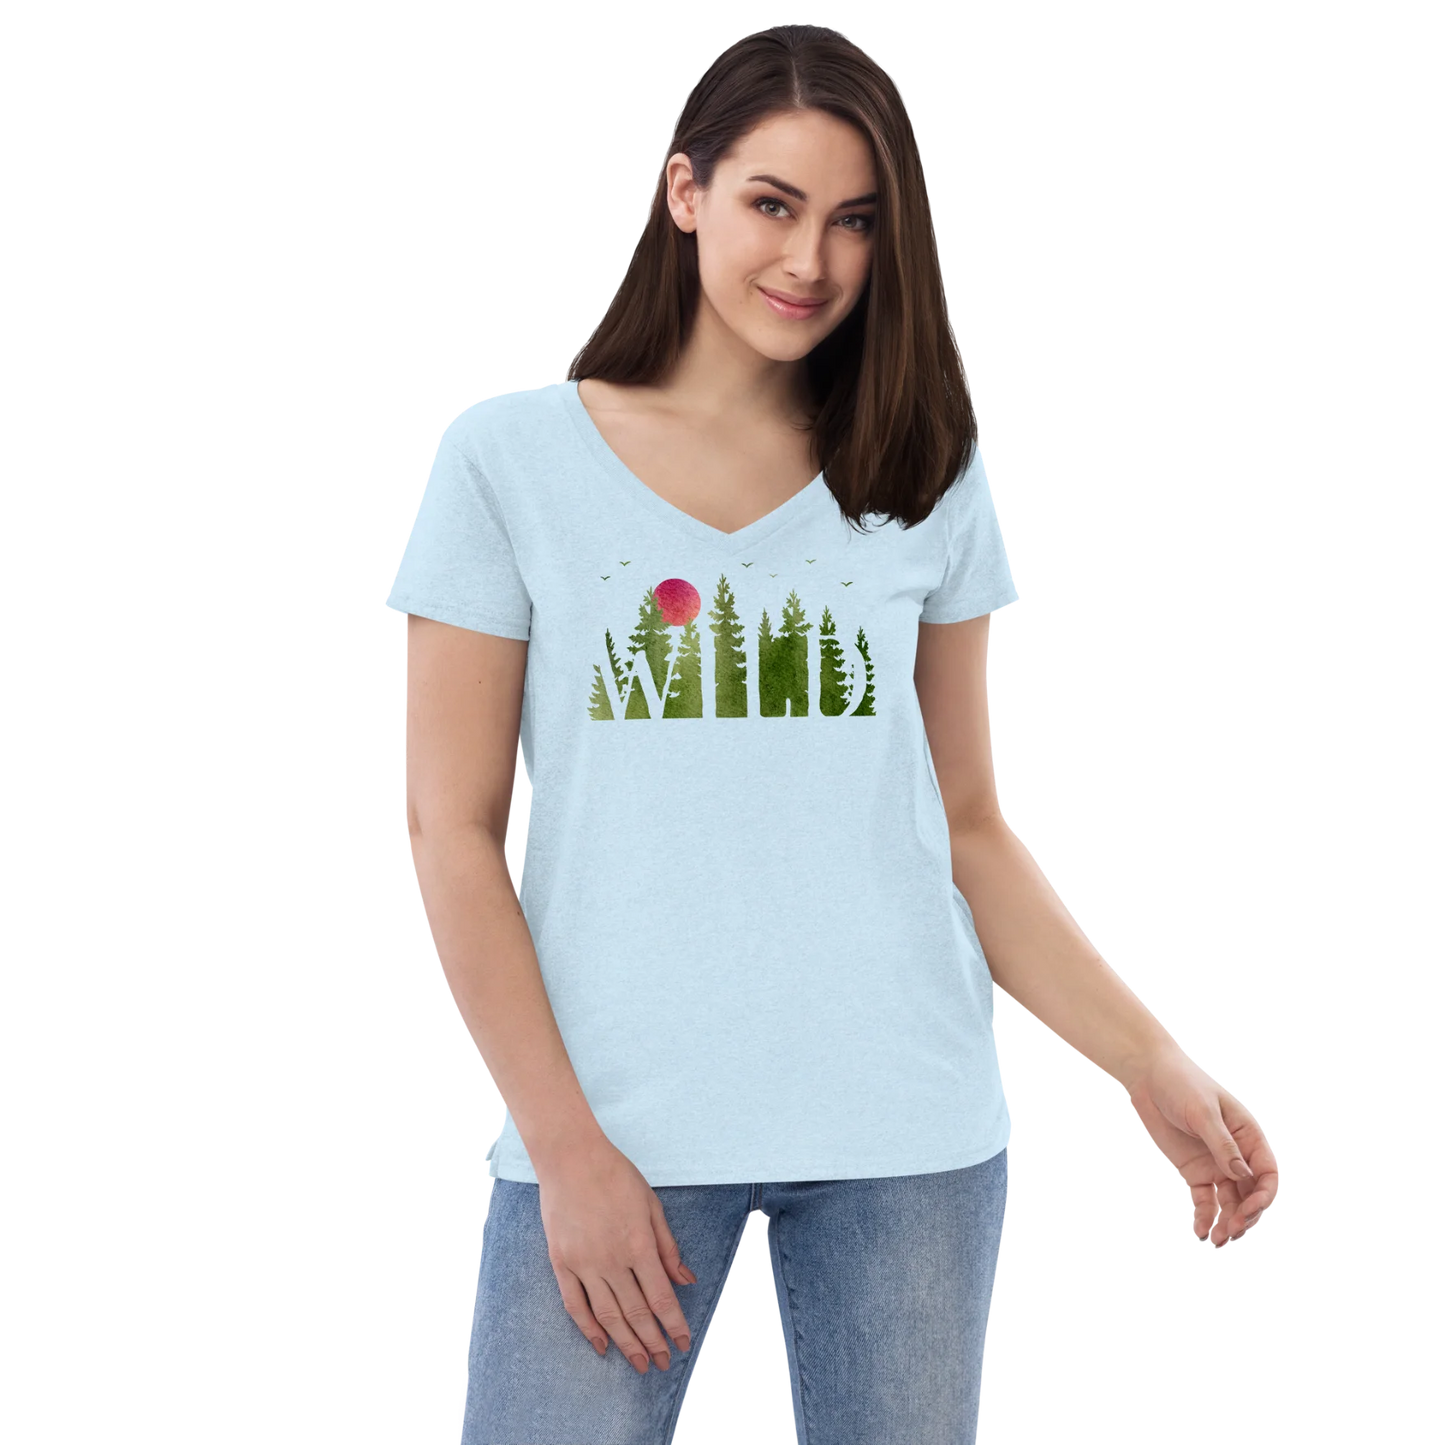 "Wild Soul in Green Shades" Recycled V-neck T-shirt